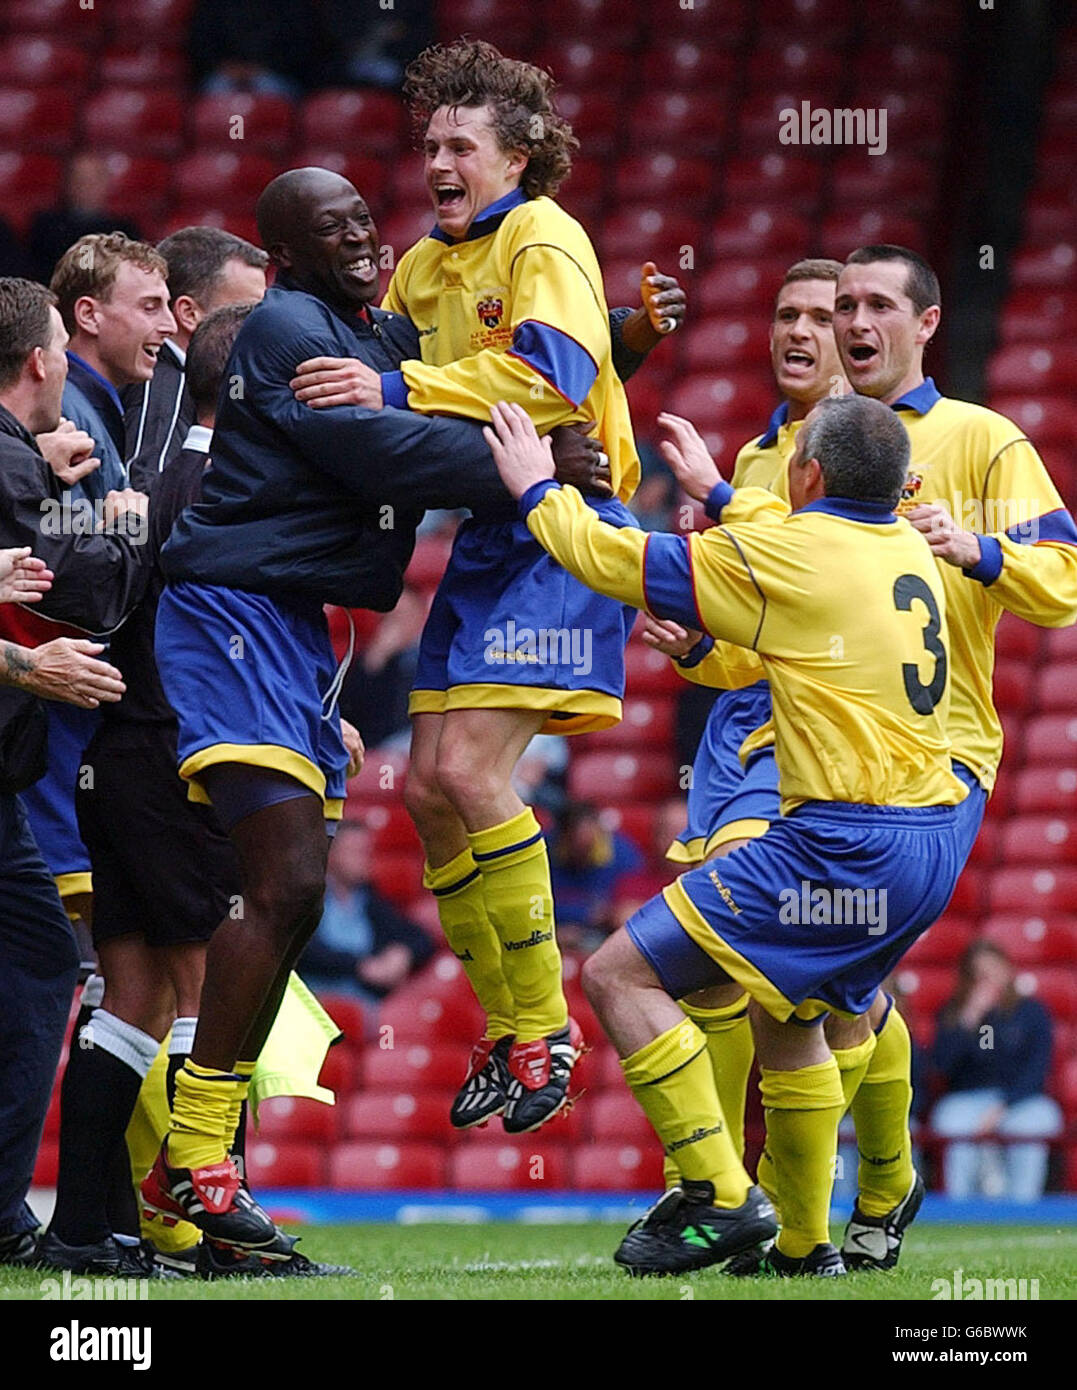 AFC Sudbury's Terry Rayner (centre jumping) celebrates his goal against Brigg Town with his team mates, during the FA Vase final at Upton Park, east London. NO UNOFFICIAL CLUB WEBSITE USE. Stock Photo